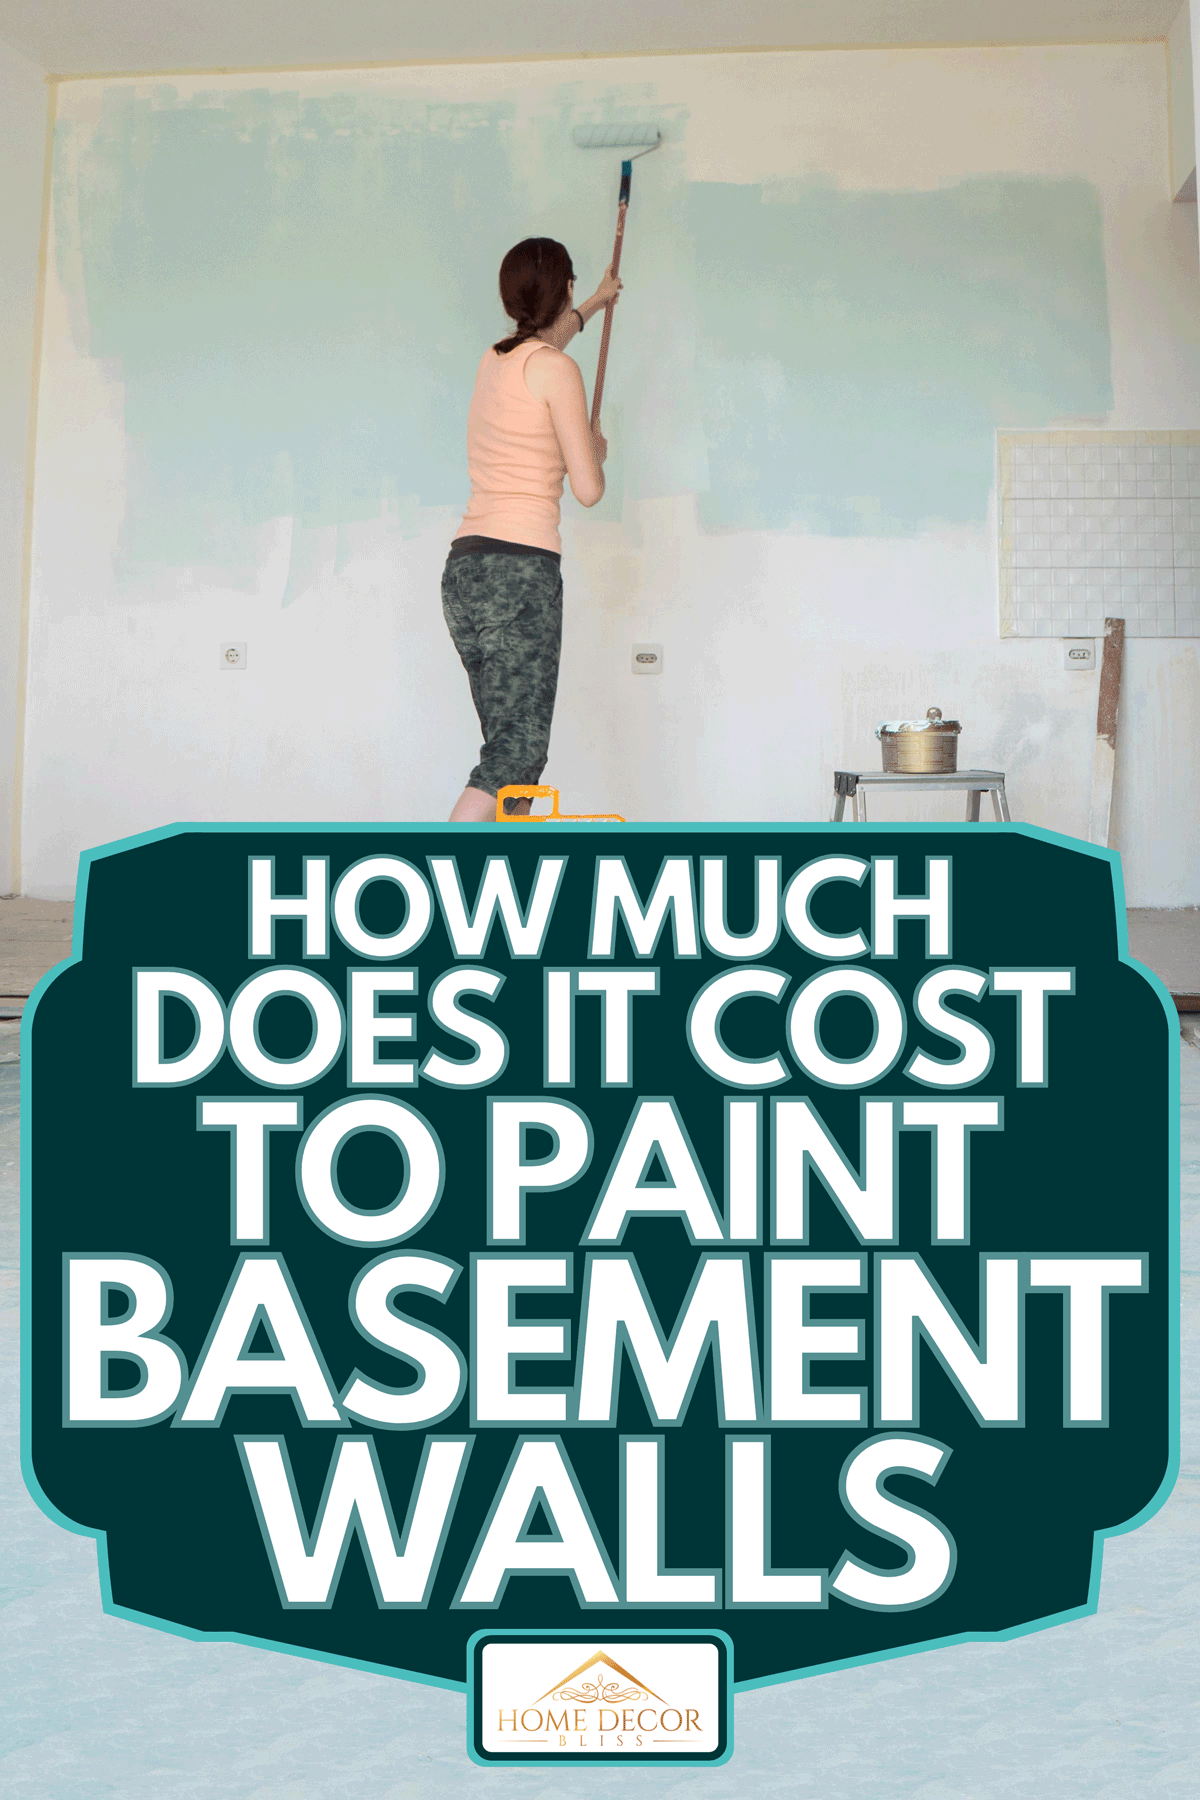 Woman painting wall using paint roller, How Much Does It Cost To Paint Basement Walls?